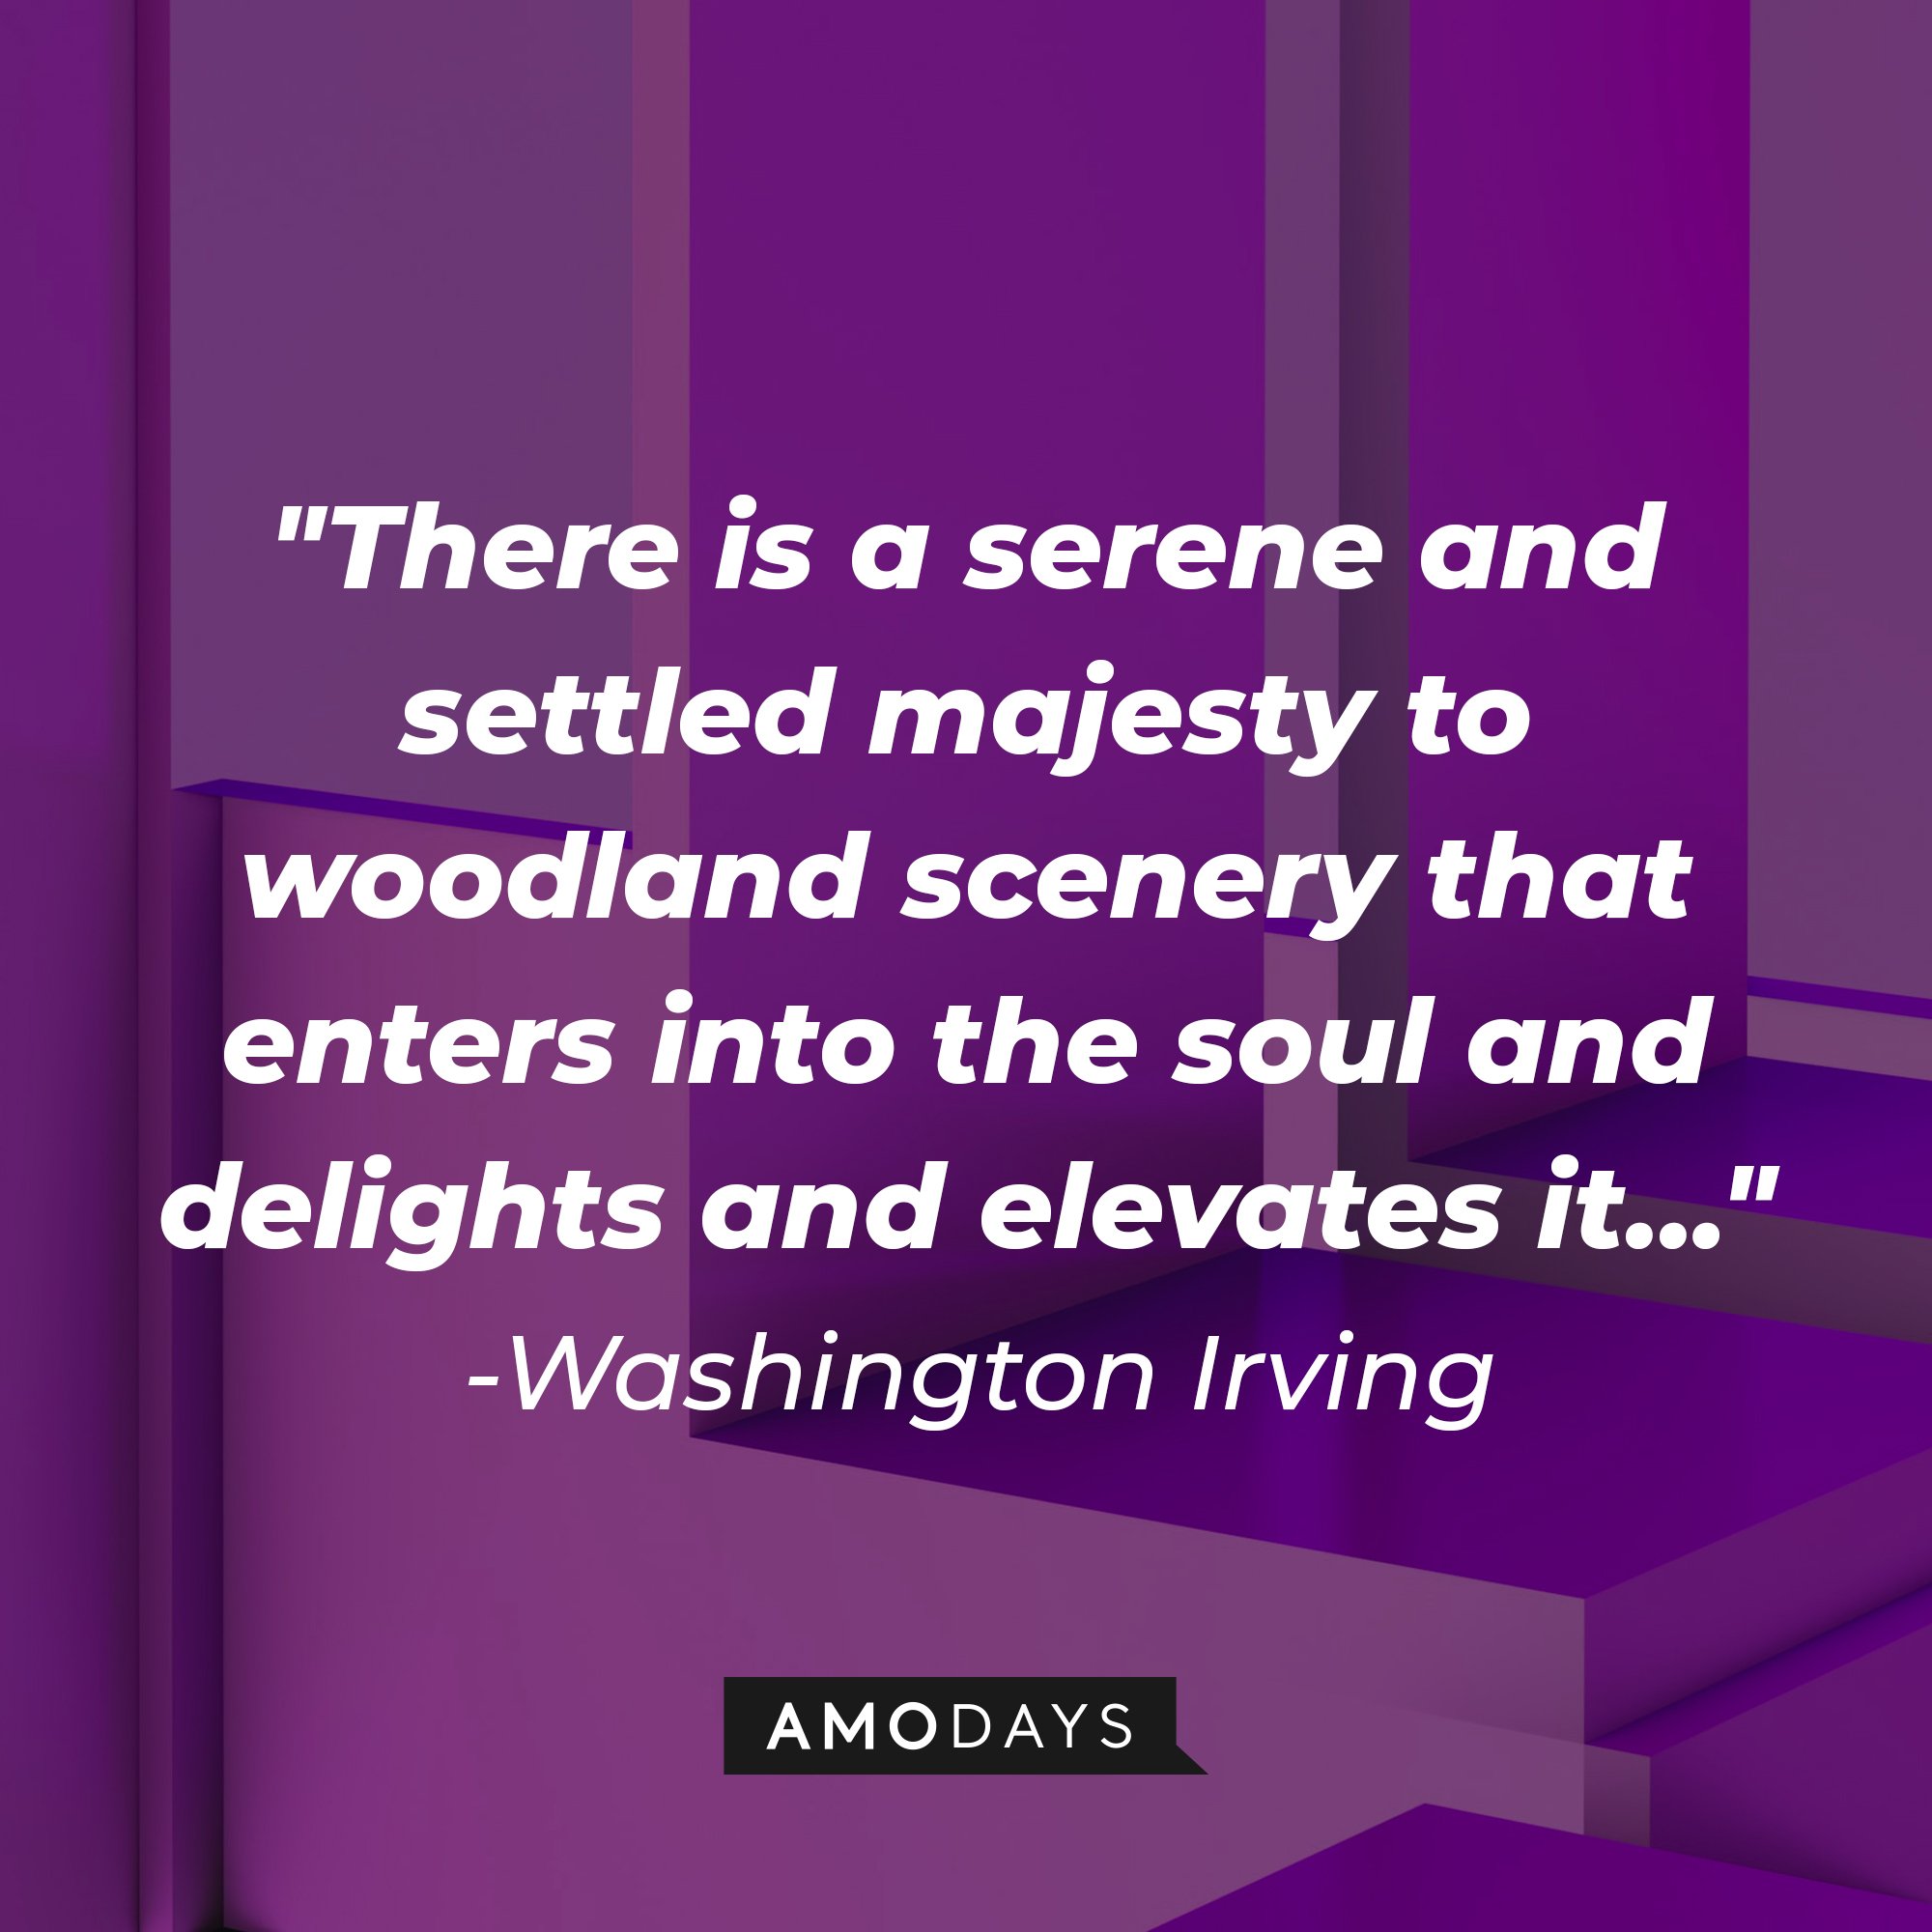 Washington Irving’s quote: "There is a serene and settled majesty to woodland scenery that enters into the soul and delights and elevates it…" | Image: AmoDays